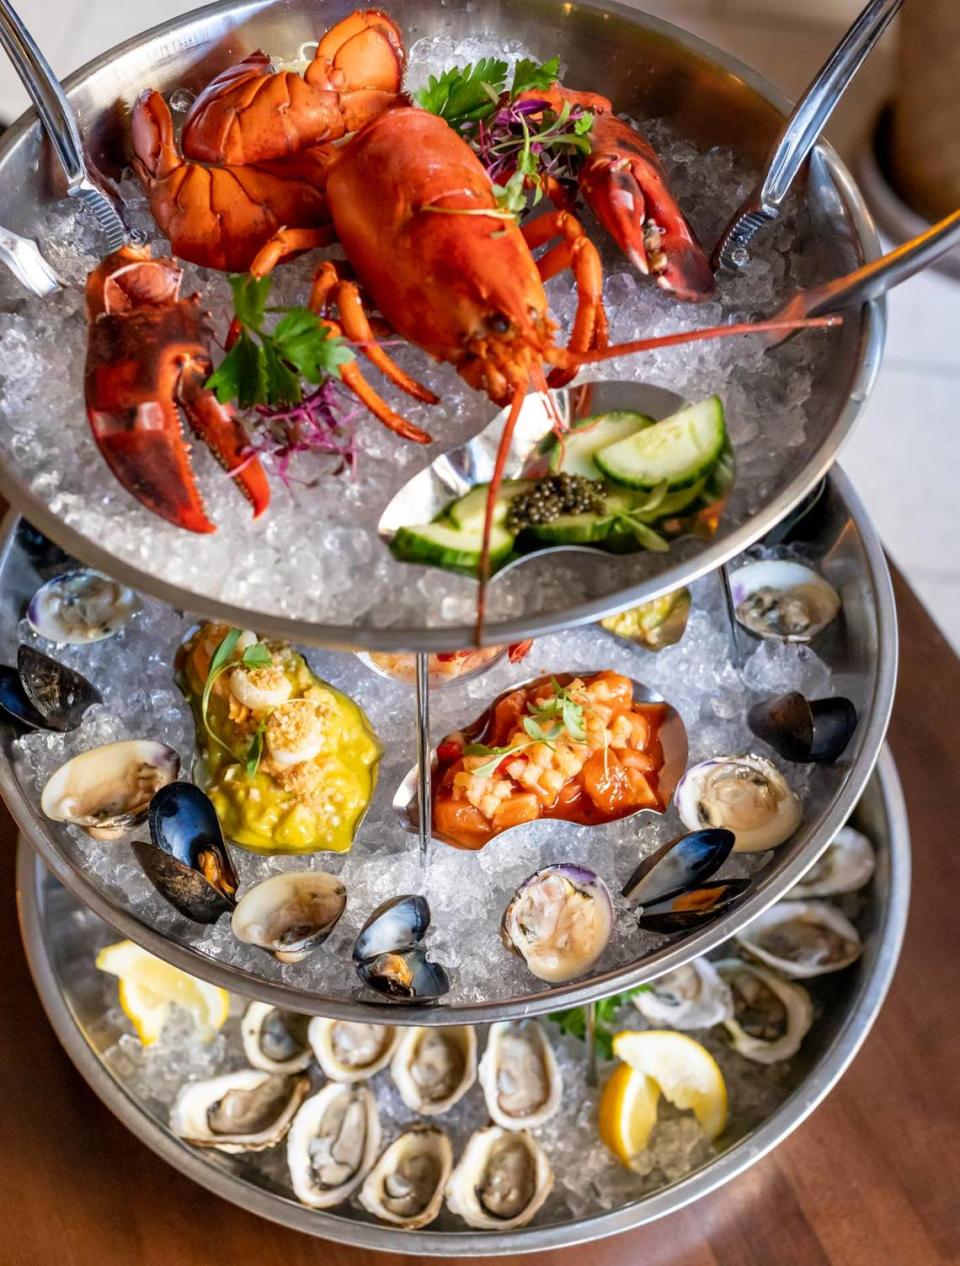 The Truist Tower at Sea Level includes a chef’s selection of 24 oysters, 12 mussels, 10 raw clams, shrimp cocktail, seasonal ceviche, salmon poke, Maine lobster and Marshallburg Farm caviar.